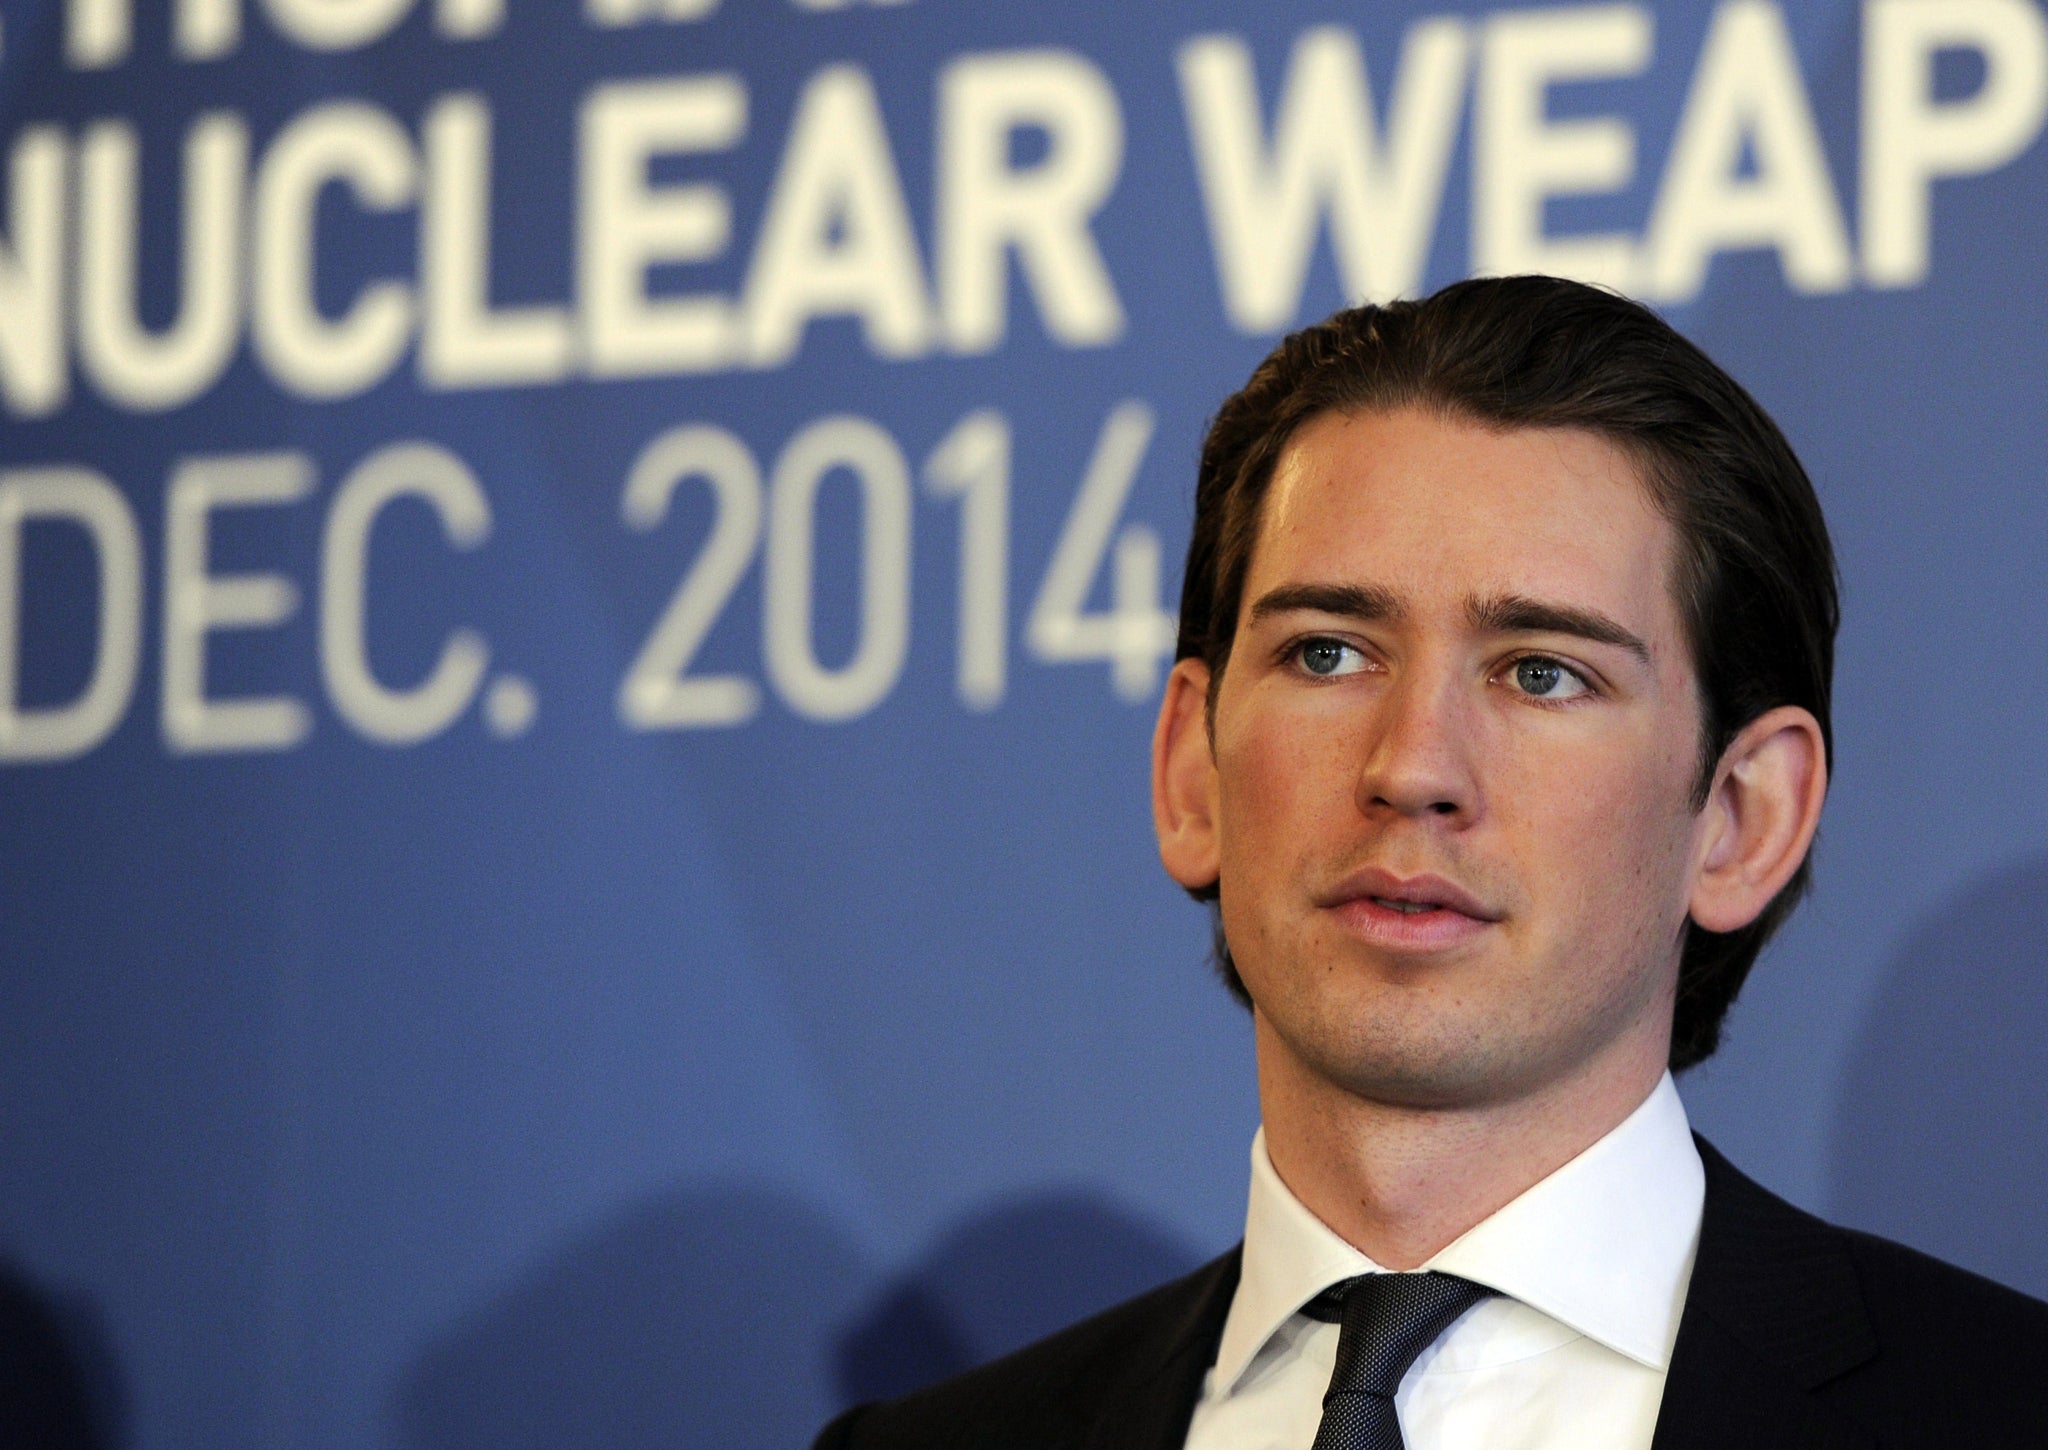 at 28, Austria's Sebastian Kurz is the youngest foreign minister in the EU